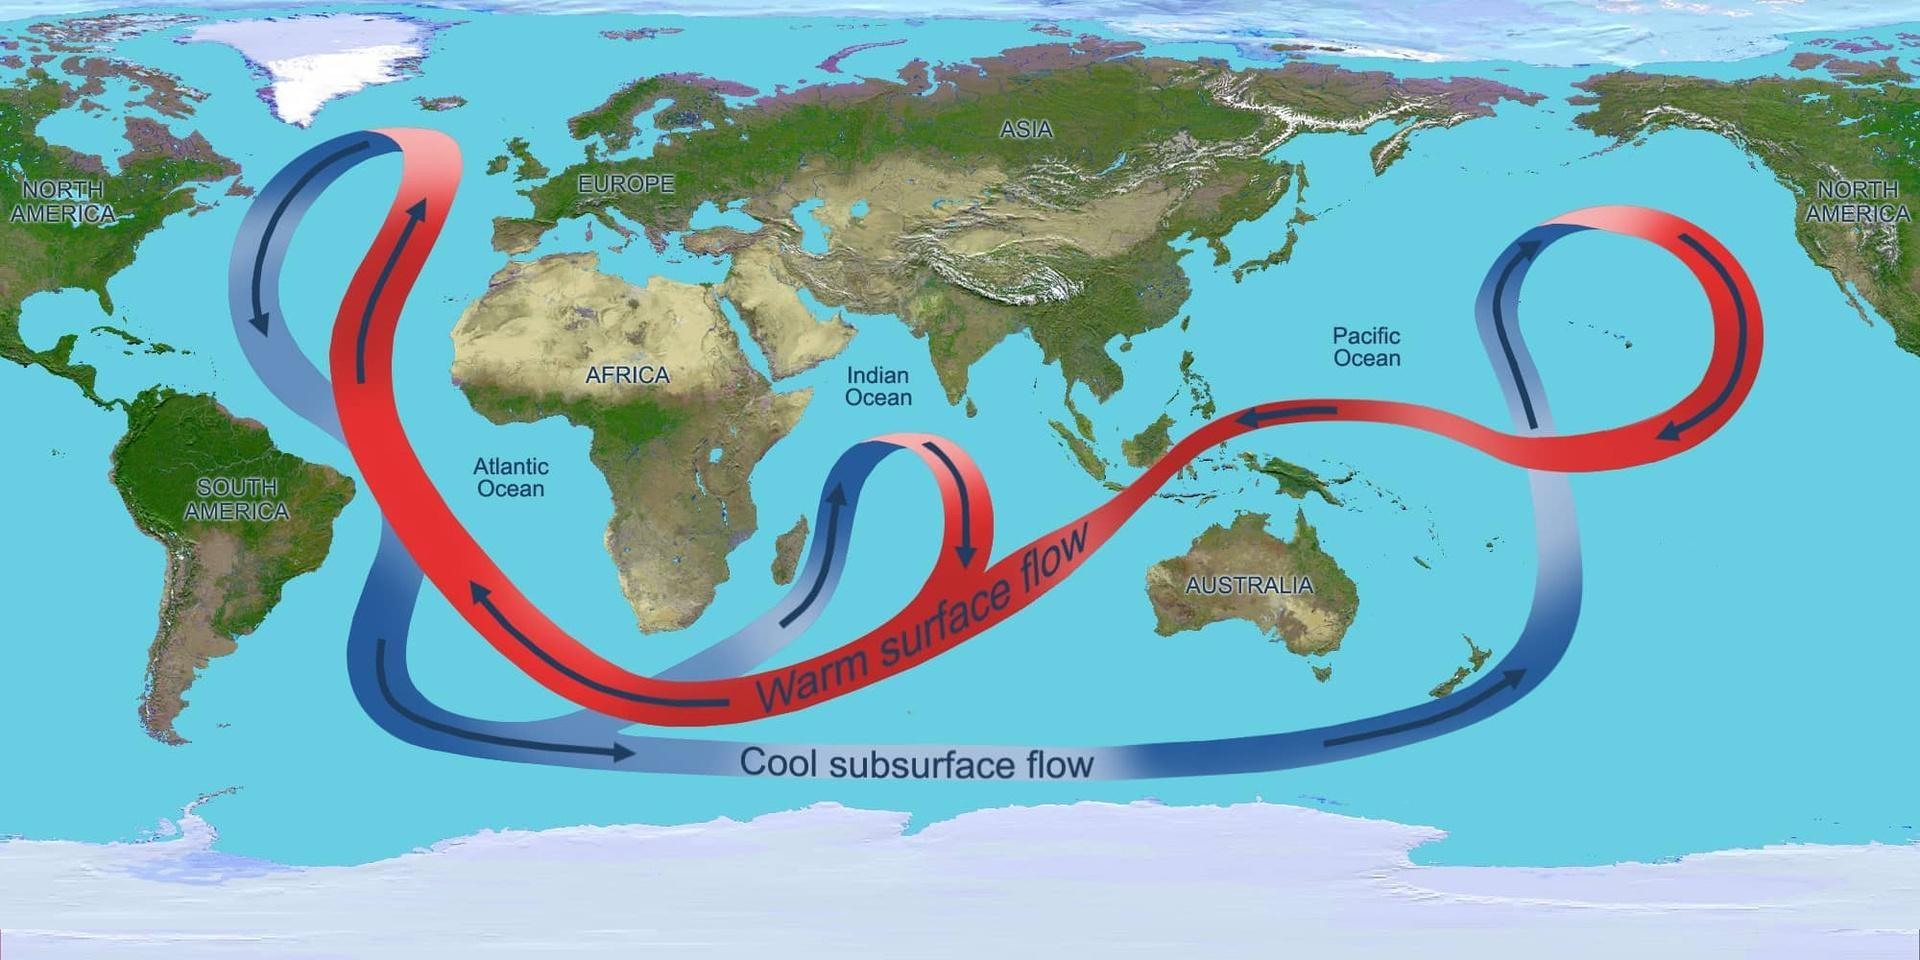 lllustration depicting the overturning circulation of the global ocean. Throughout the Atlantic Ocean, the circulation carries warm waters (red arrows) northward near the surface and cold deep waters (blue arrows) southward.